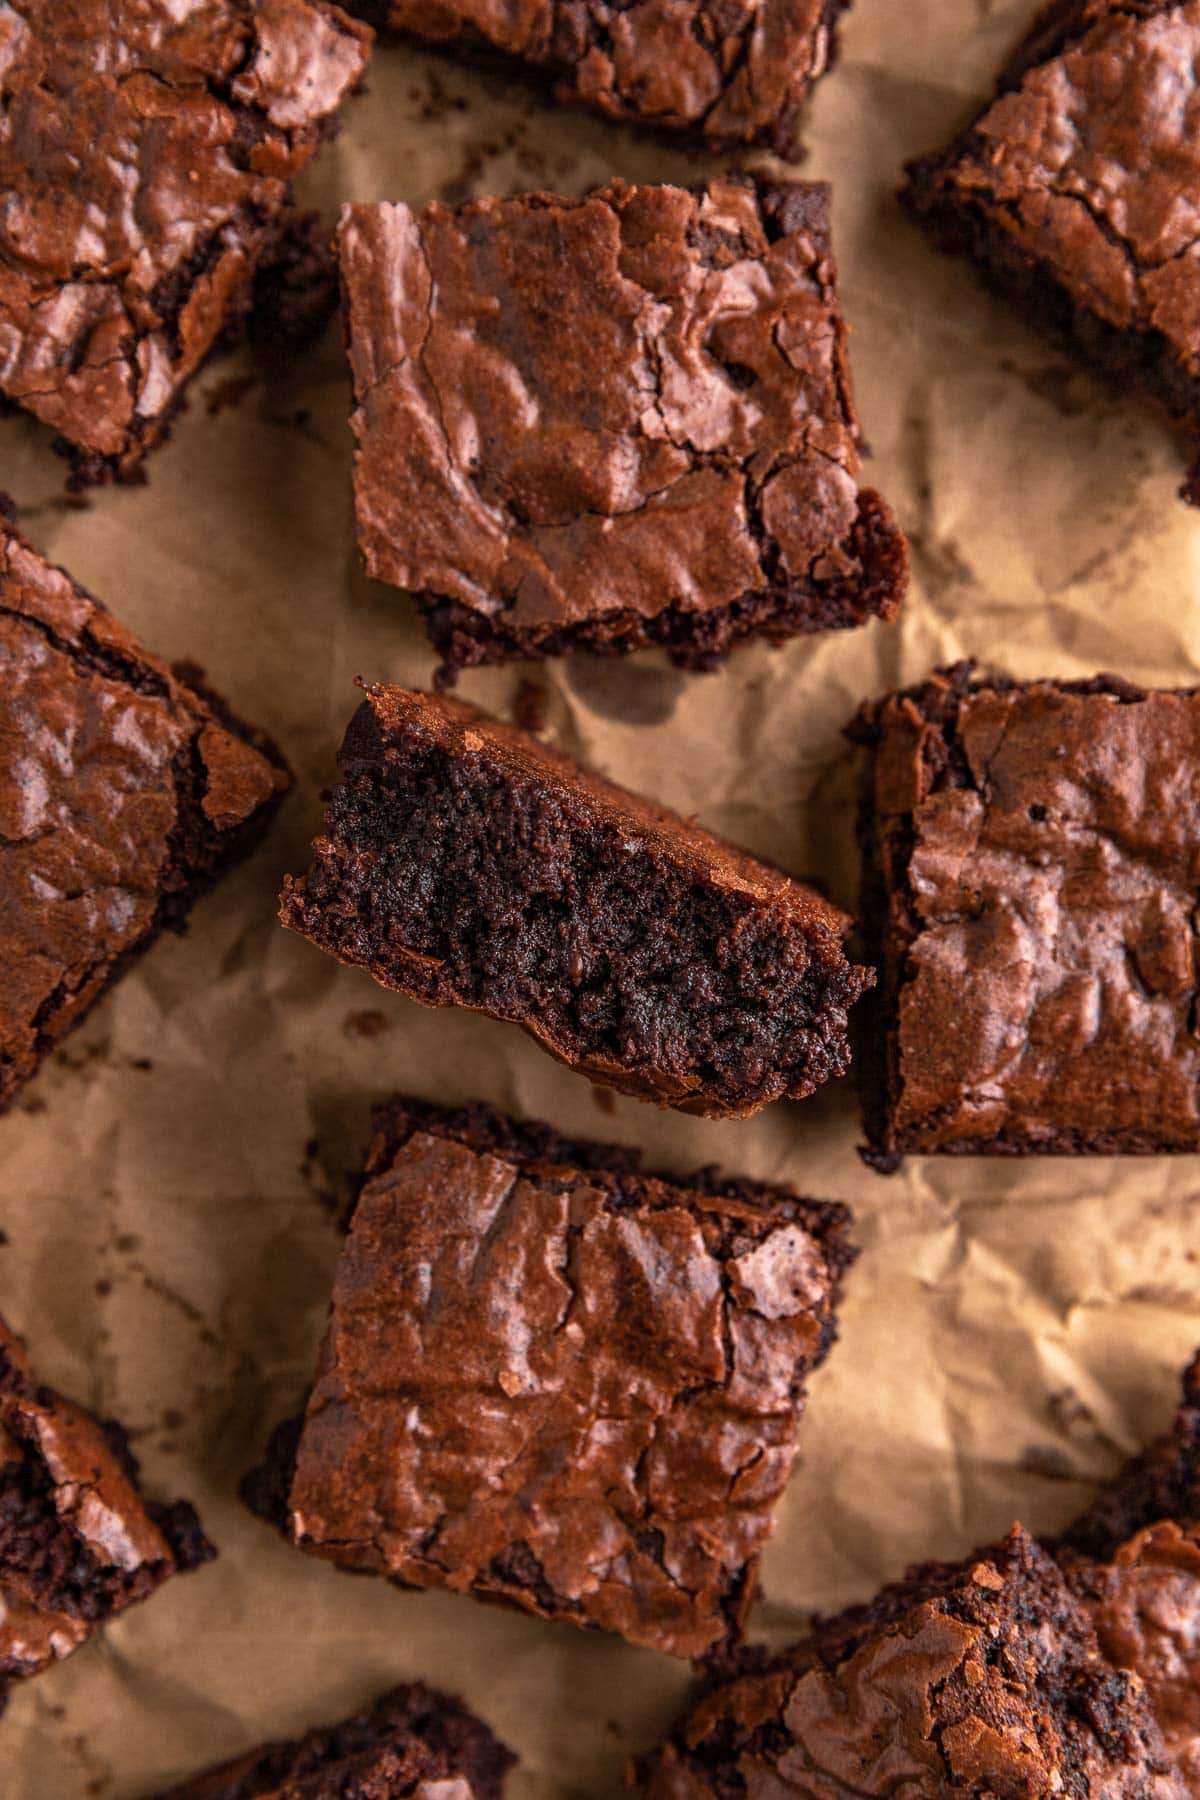 Super Rich Chocolate Brownies baked brownies spread out on parchment paper, one brownie on side